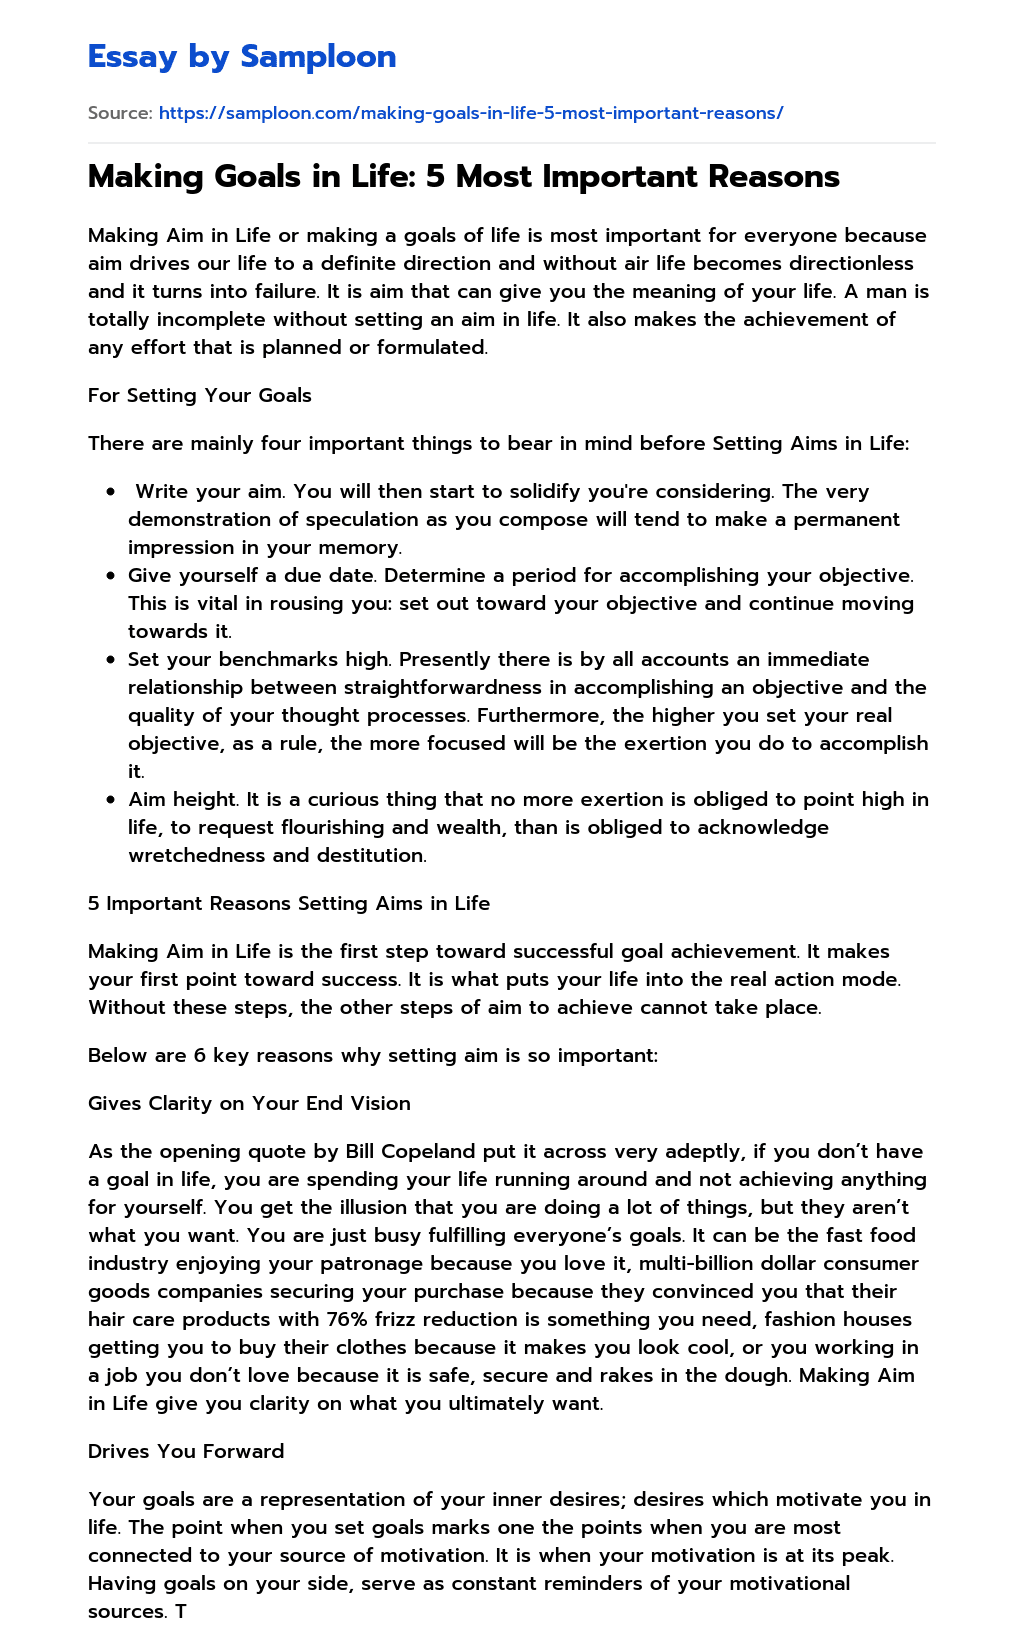 essay on why goals are important